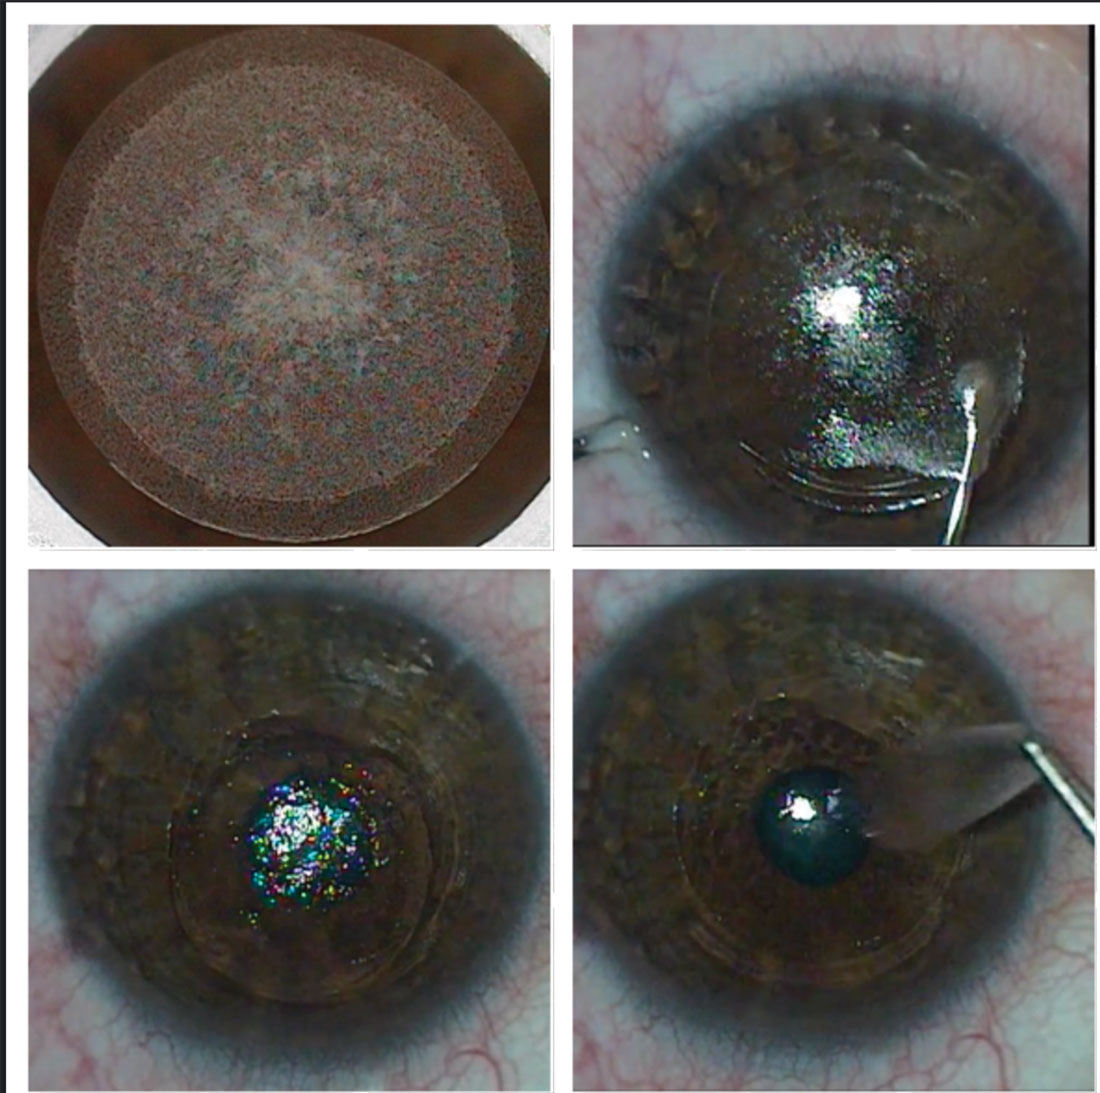 Study suggests using a thinner cap to achieve a thicker residual stromal bed and a lesser decrease in corneal biomechanical strength in the SMILE procedure.